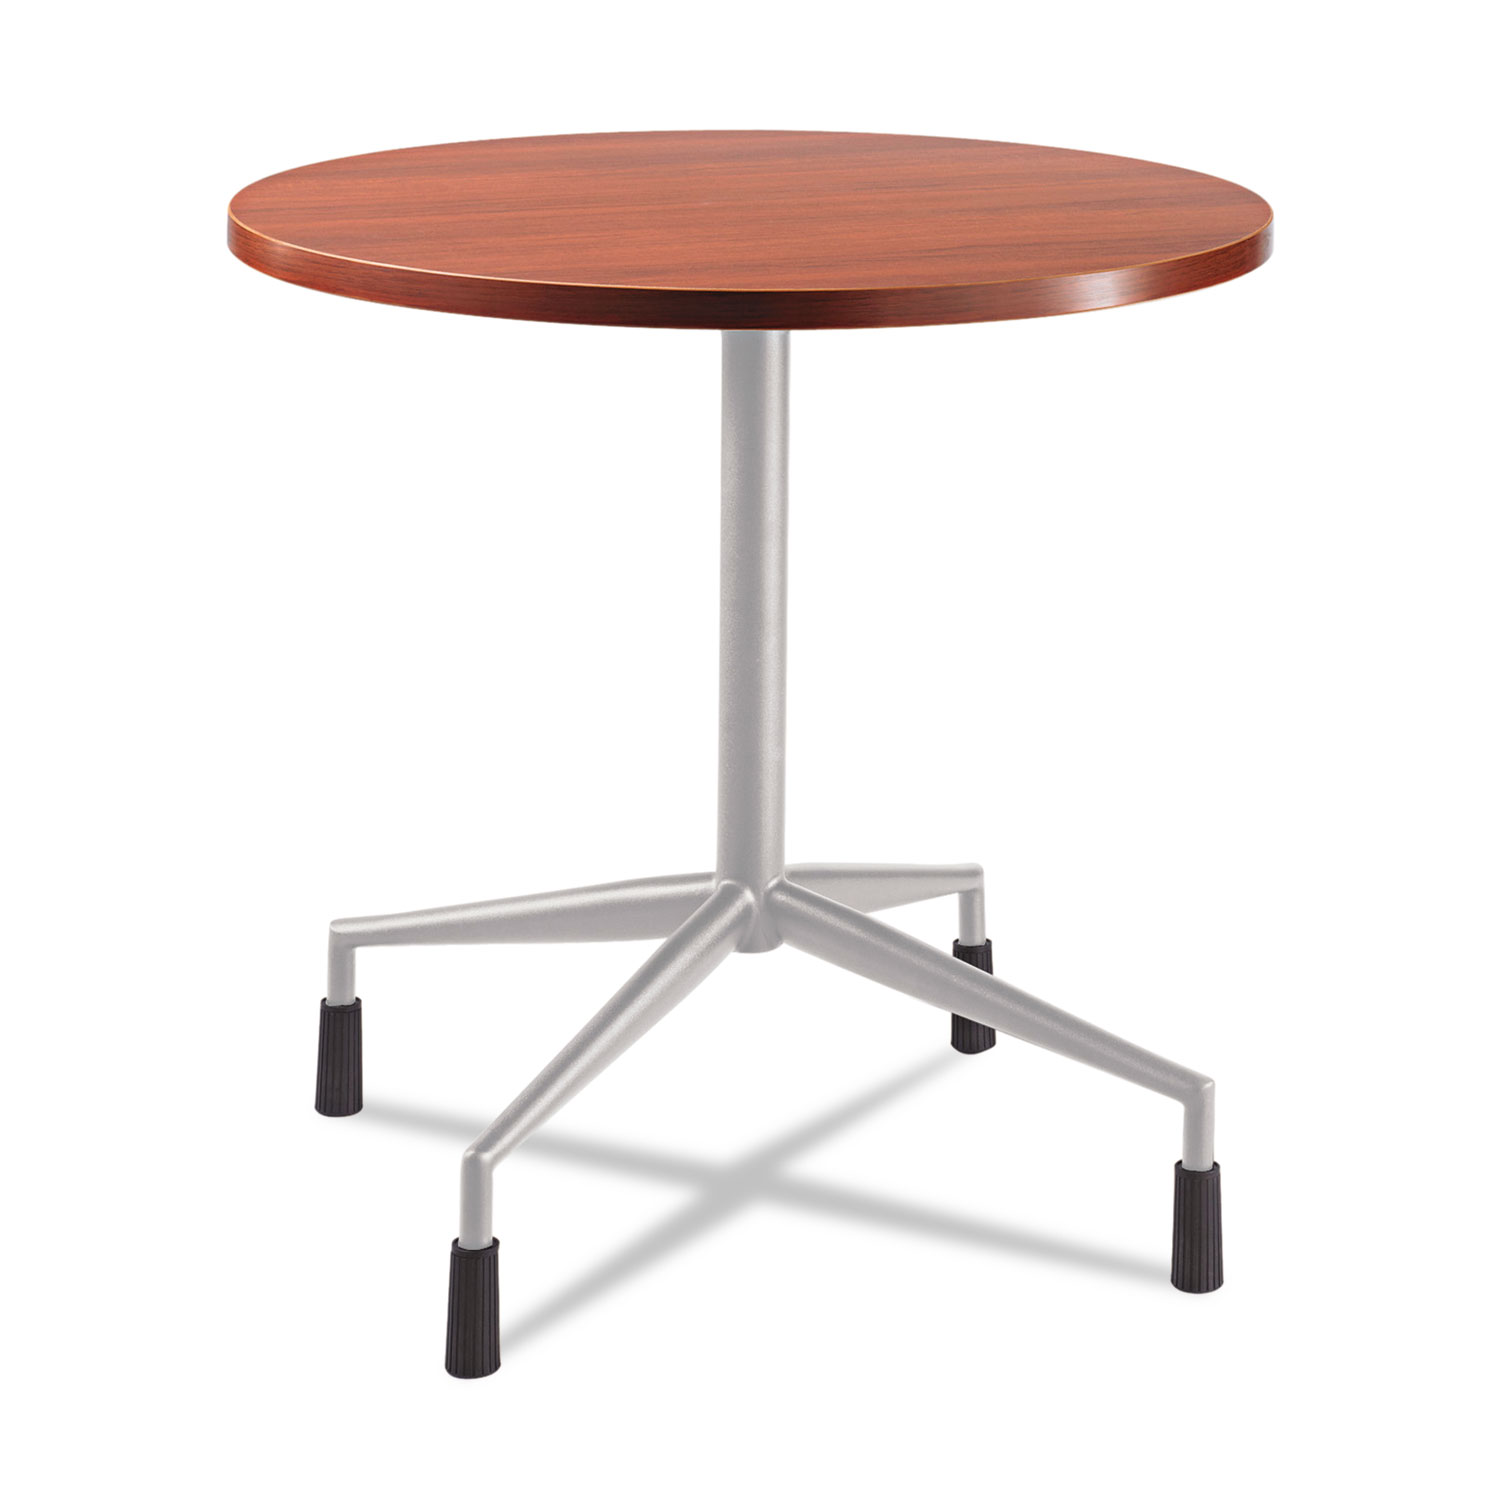 RSVP Series Standard Fixed Height Table Base, 28 dia. x 29h, Silver